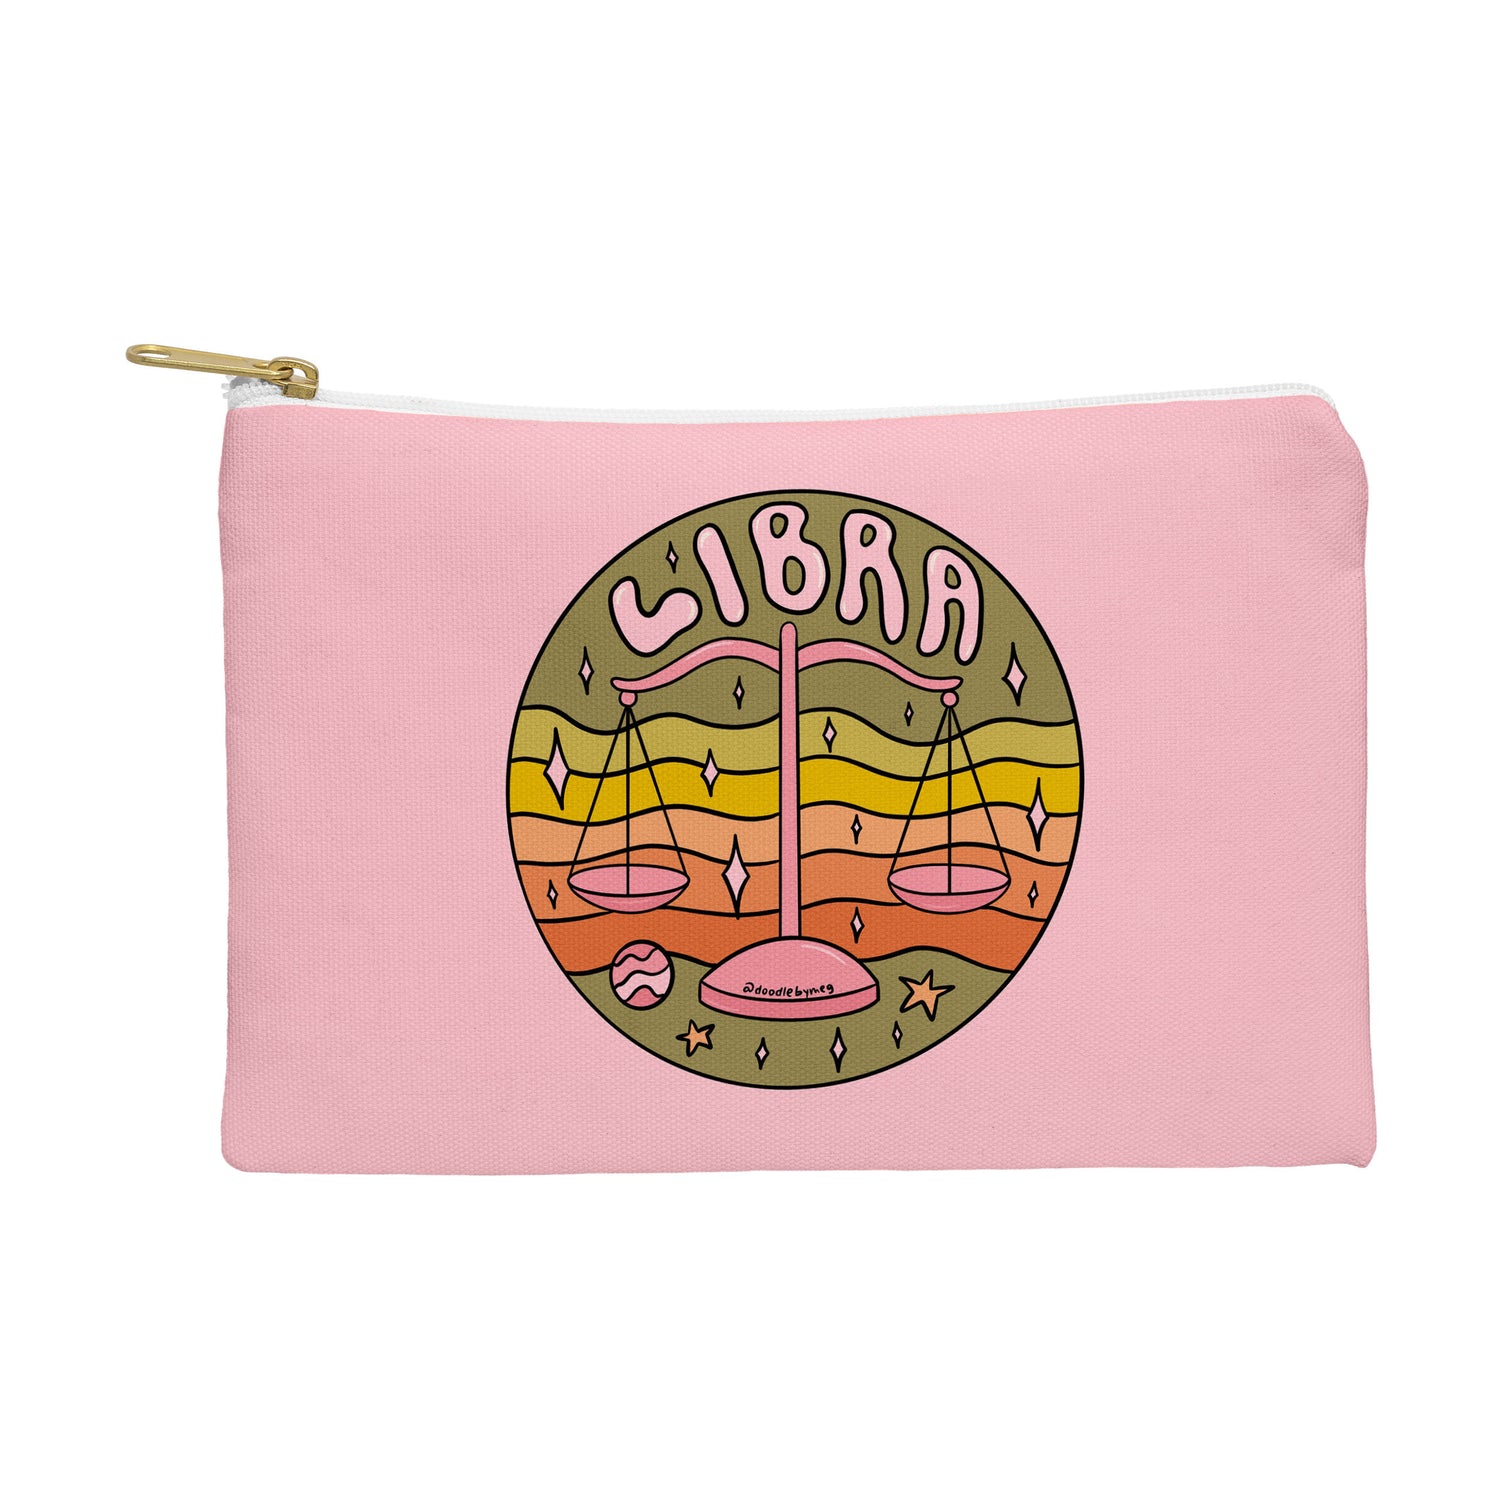 Libra 'Carry Your Cosmic Style' Zip Pouch